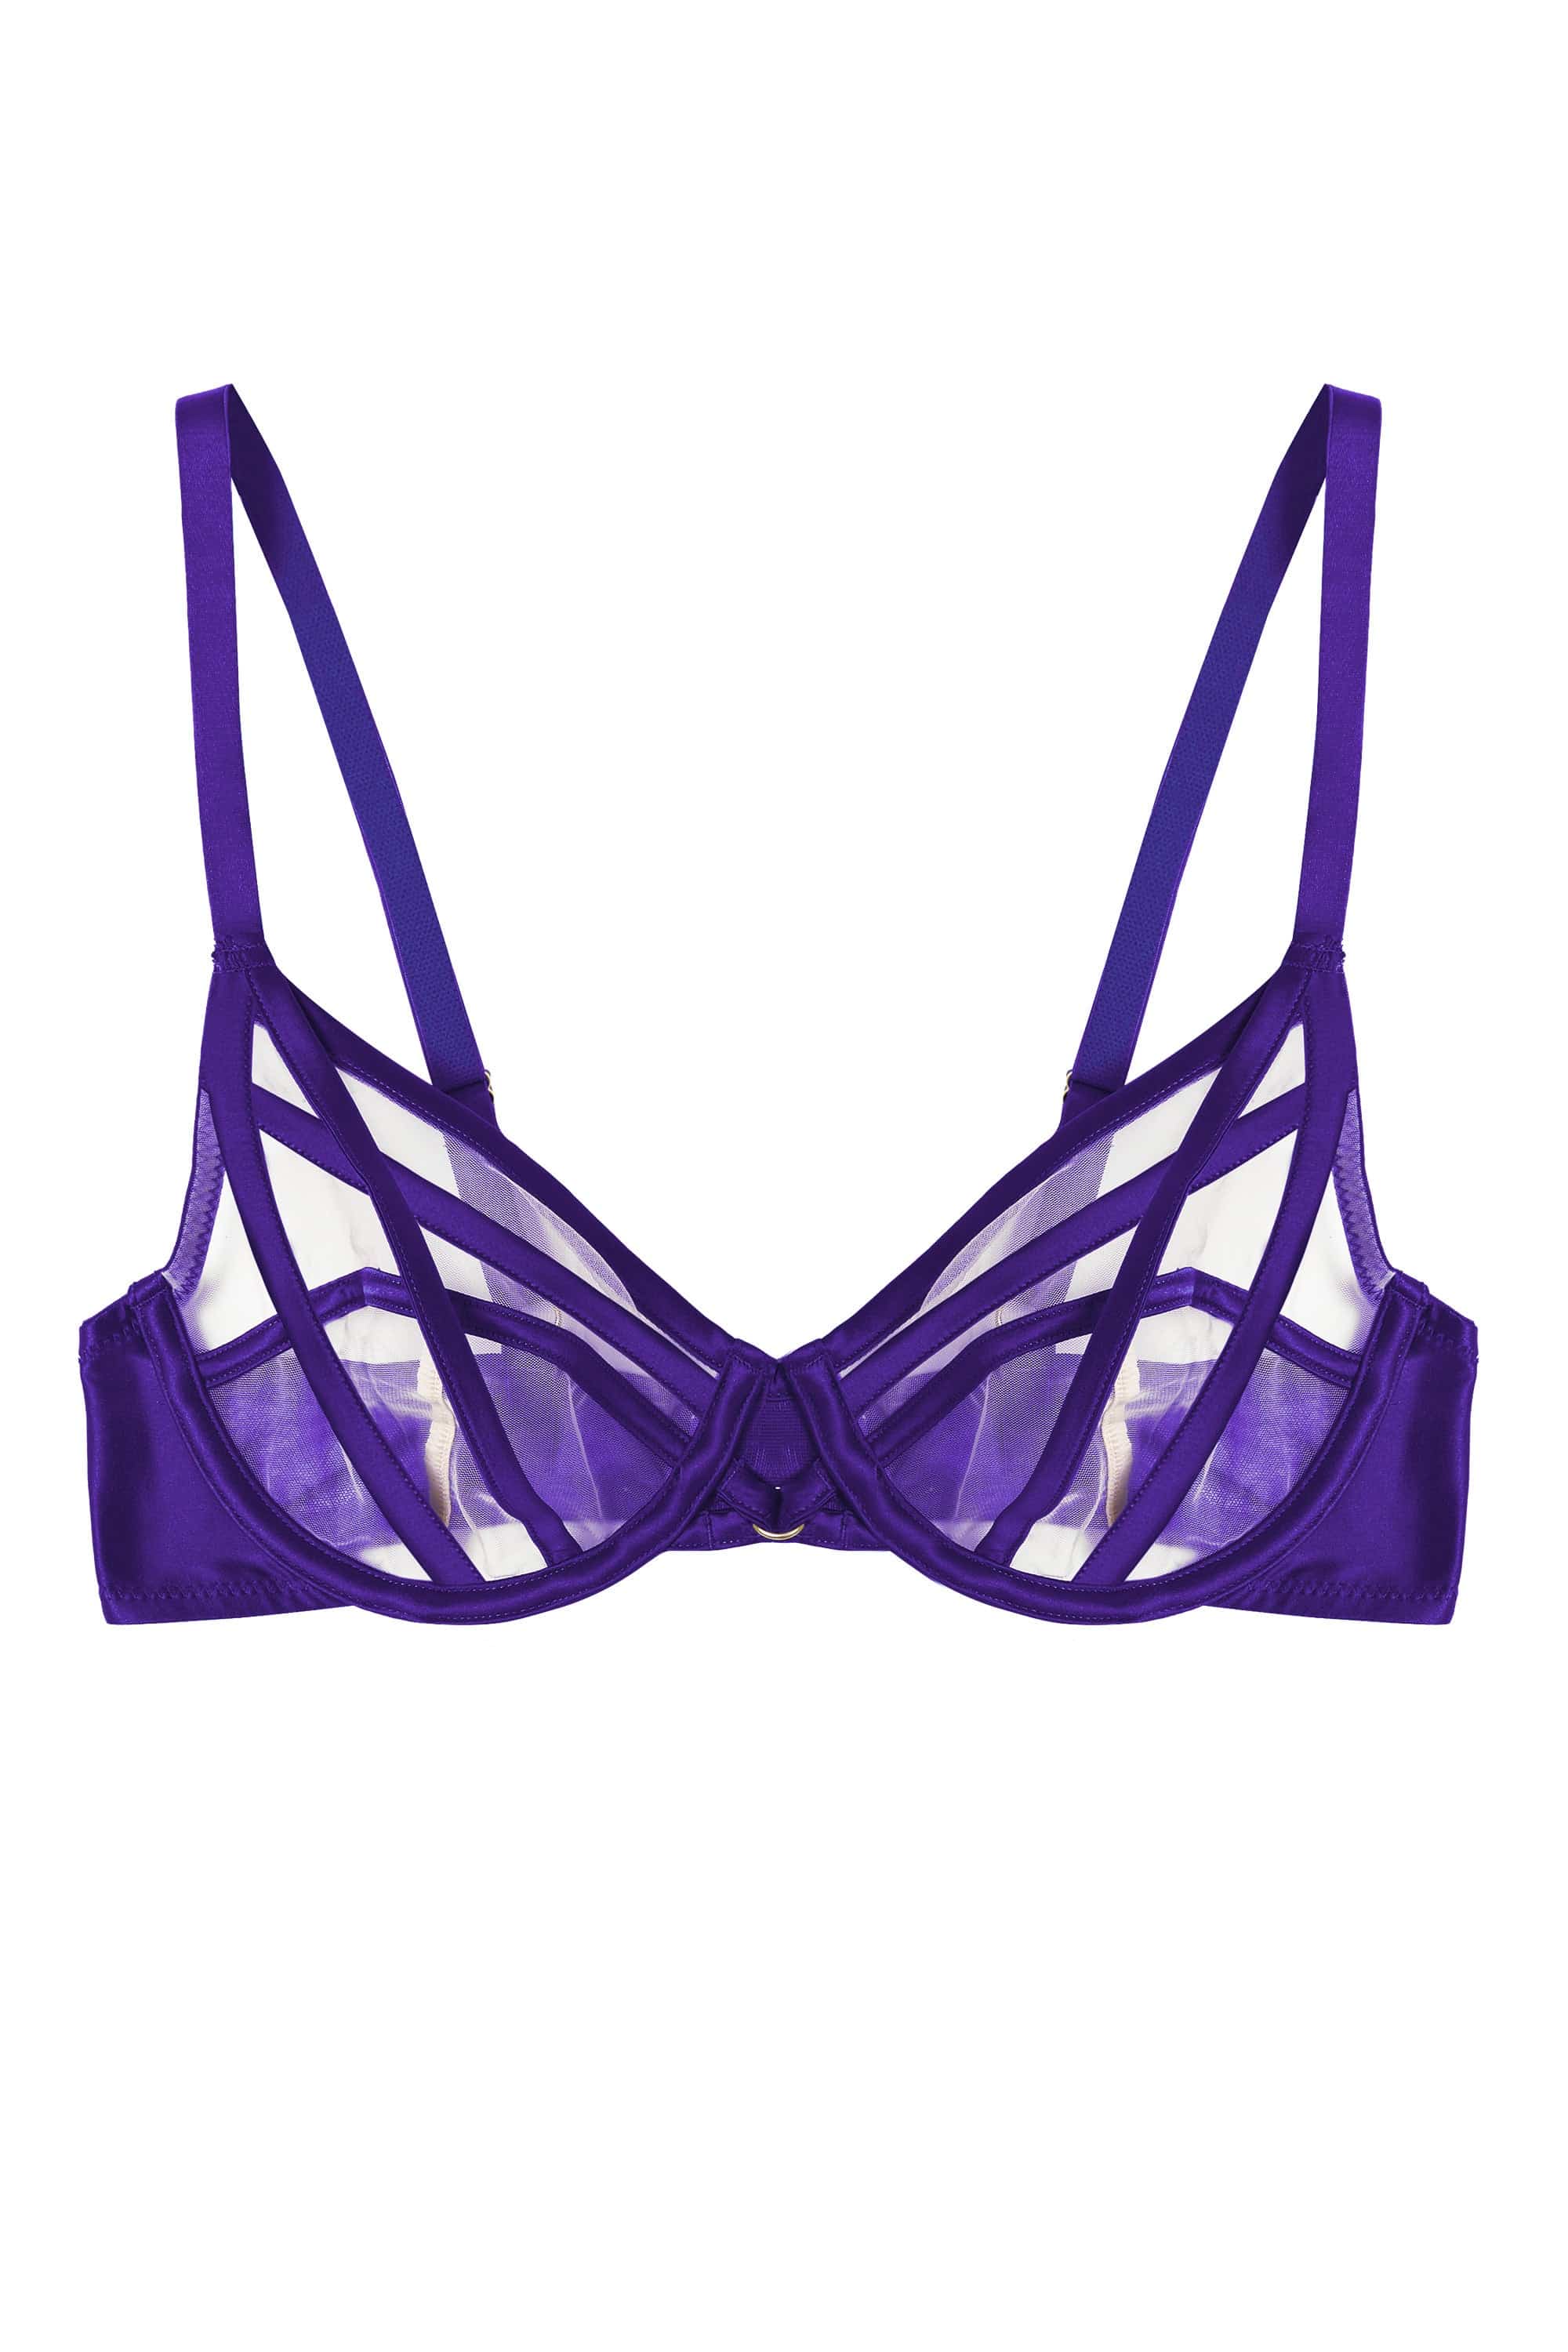 Hunkemoller Mitzy lace strappy non padded plunge bra with hardware detail  in purple - ShopStyle Plus Size Lingerie